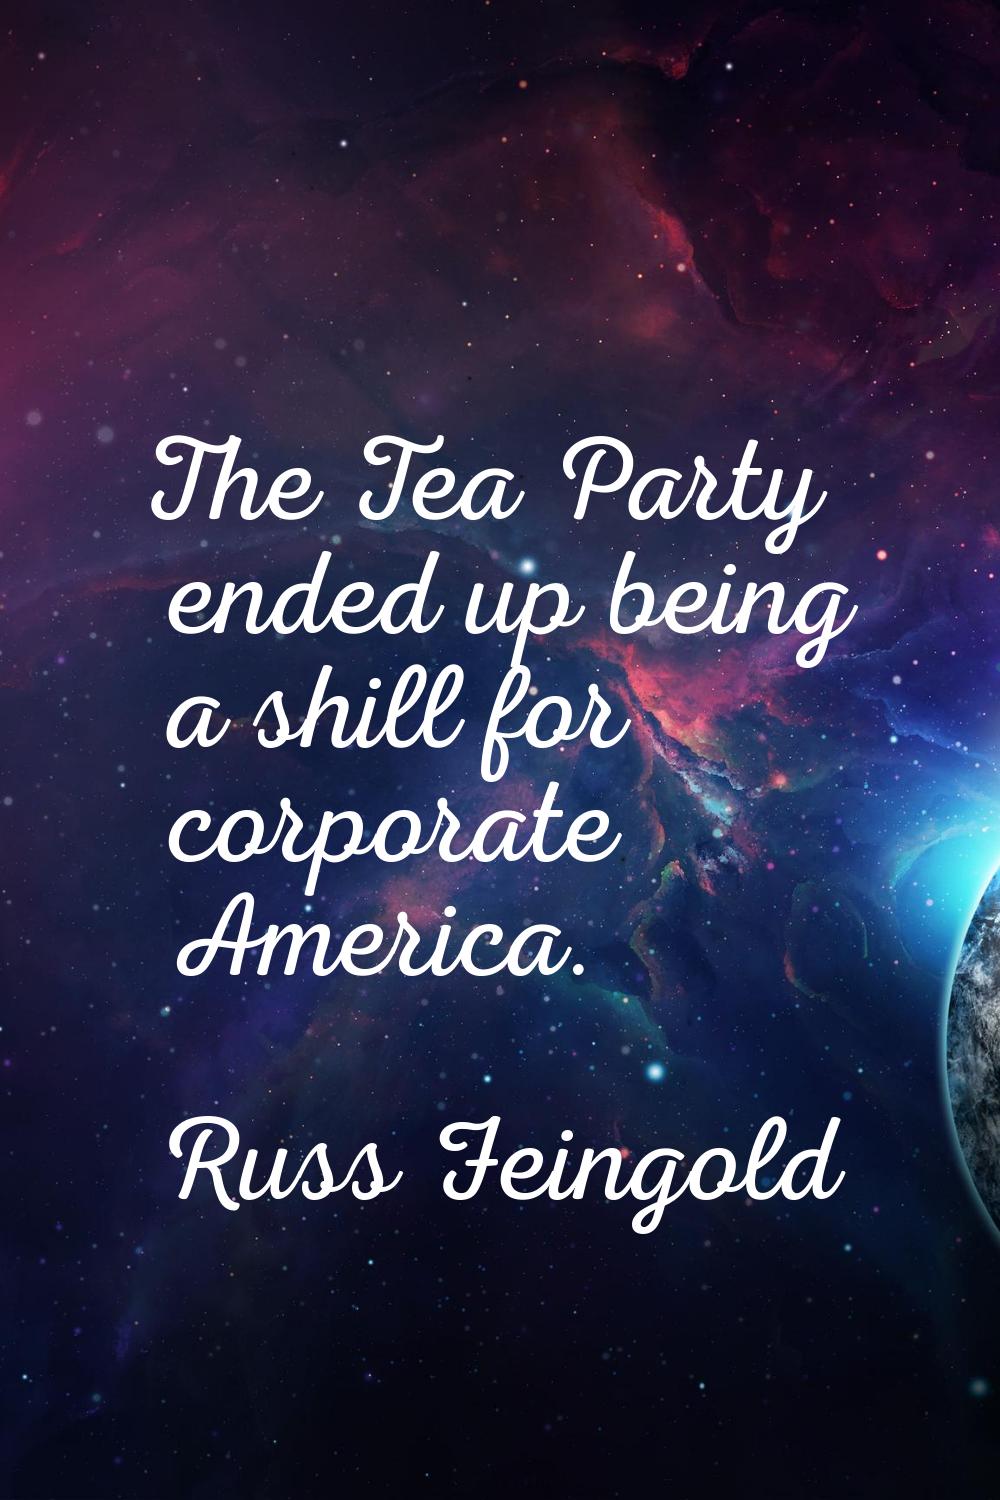 The Tea Party ended up being a shill for corporate America.